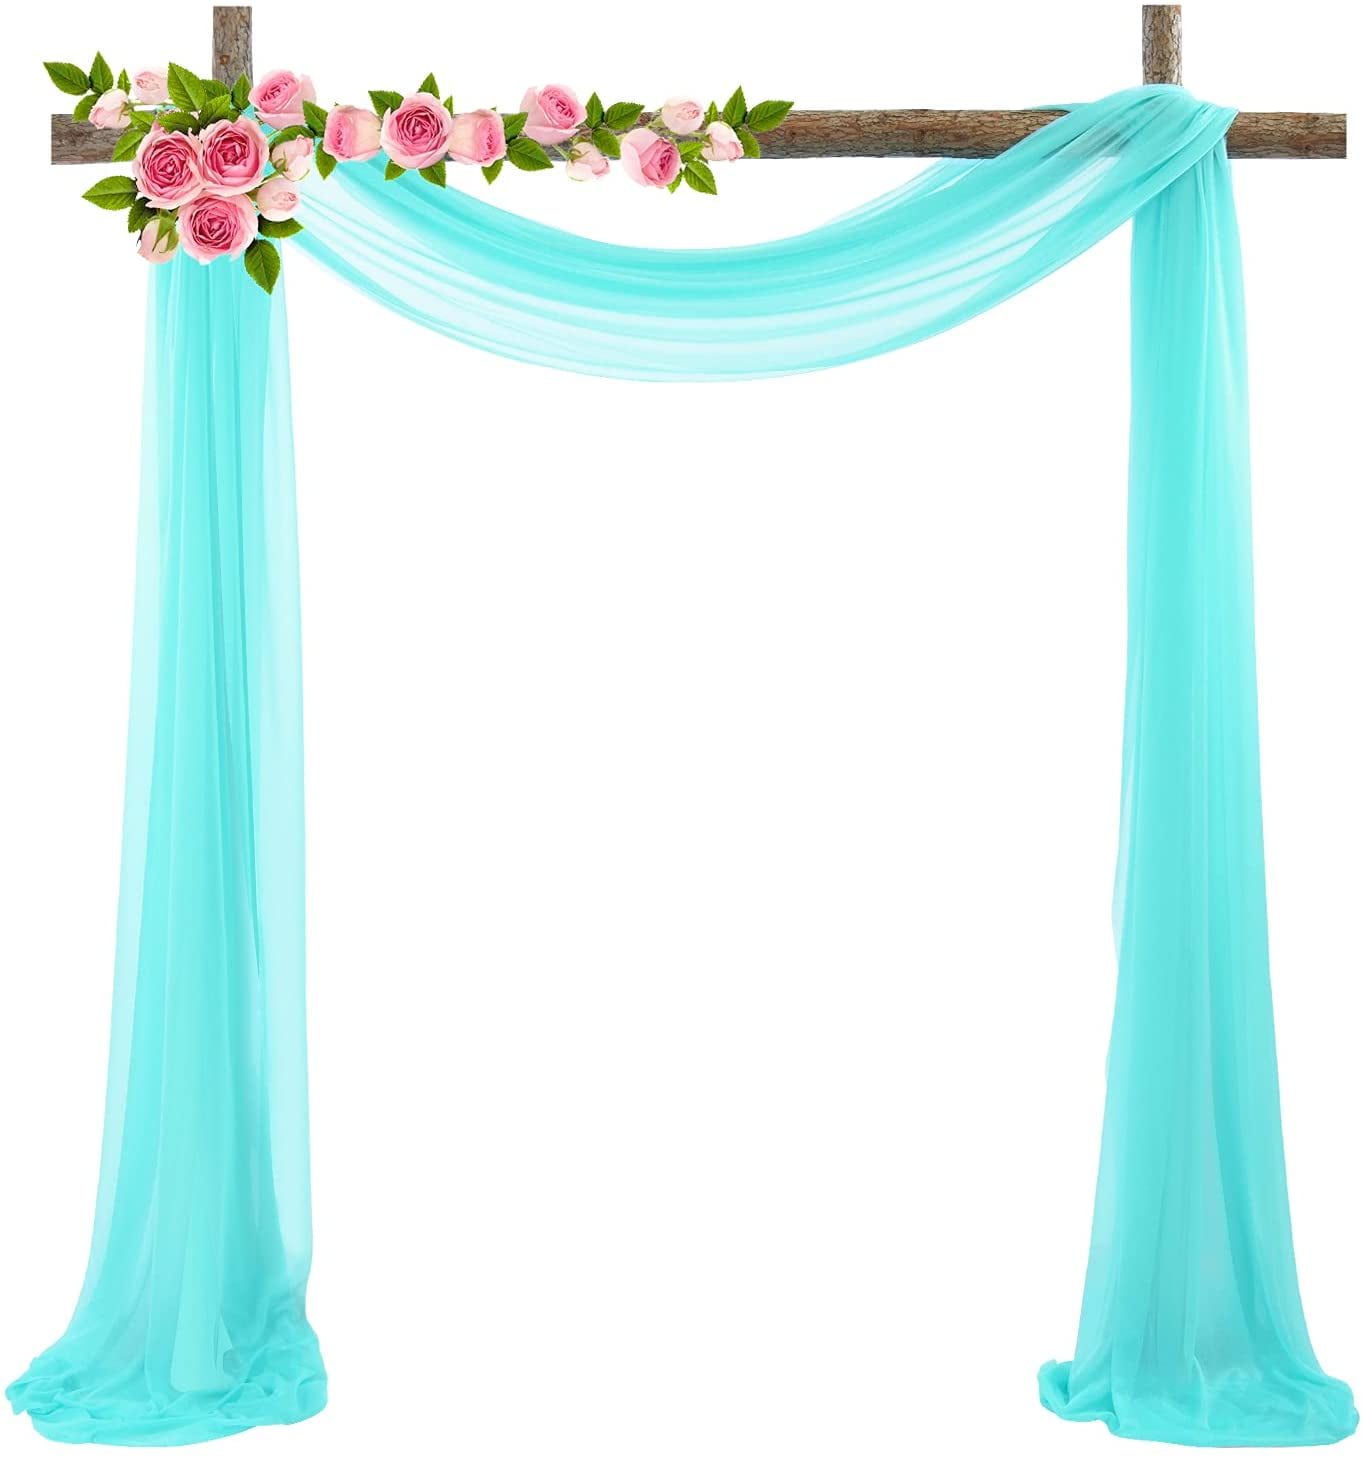 3 Panels Reusable Wedding Arch Draping Fabric 2FT X 18FT (70 X 550CM)  Photography Props For Wedding – the best products in the Joom Geek online  store